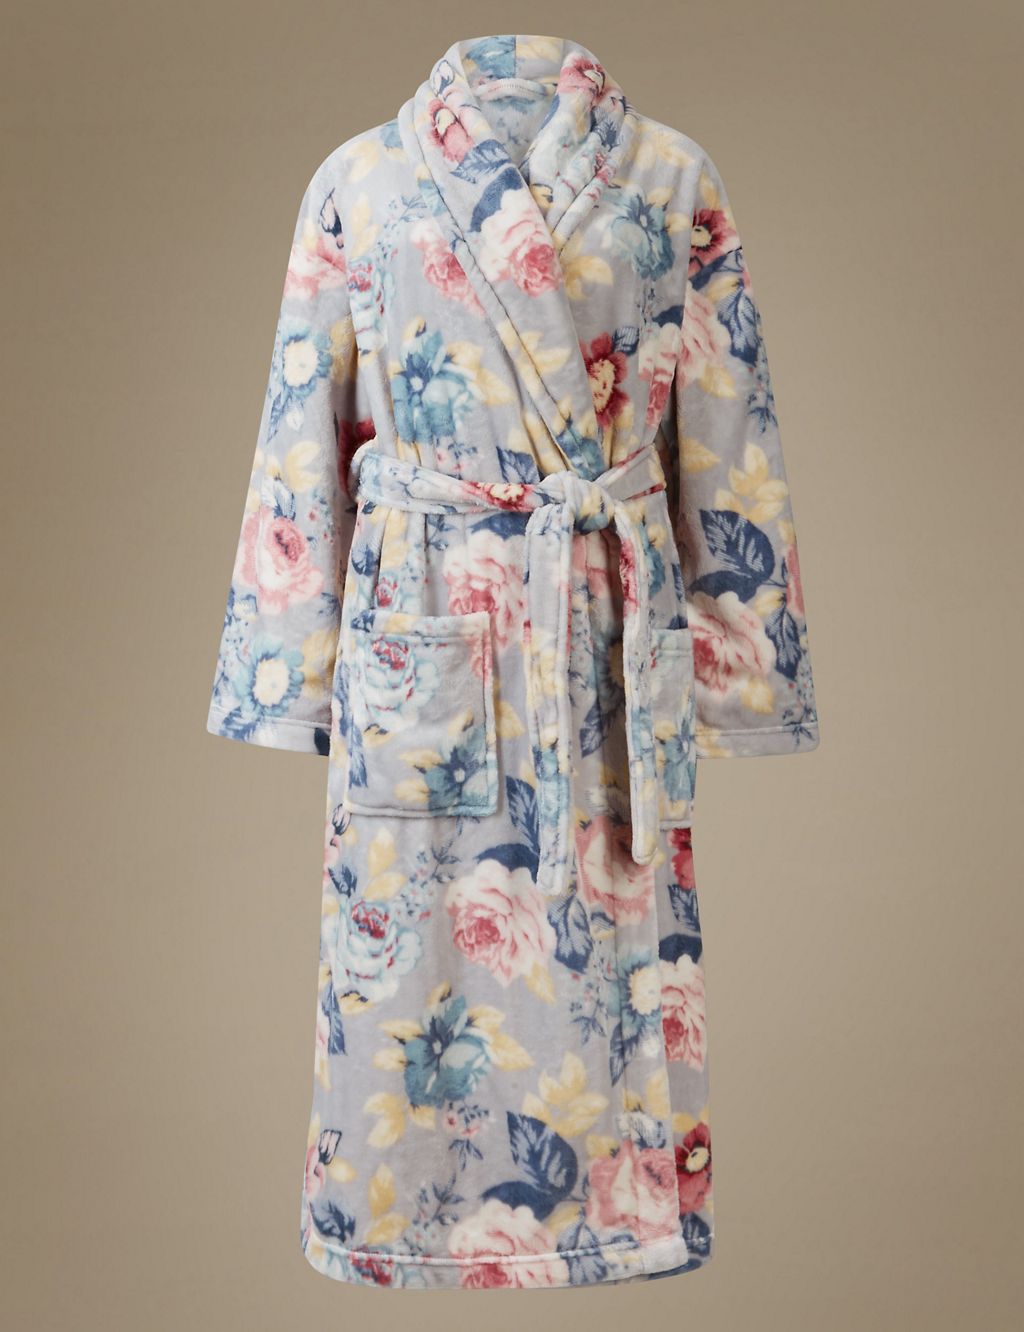 Floral Print Dressing Gown 1 of 7